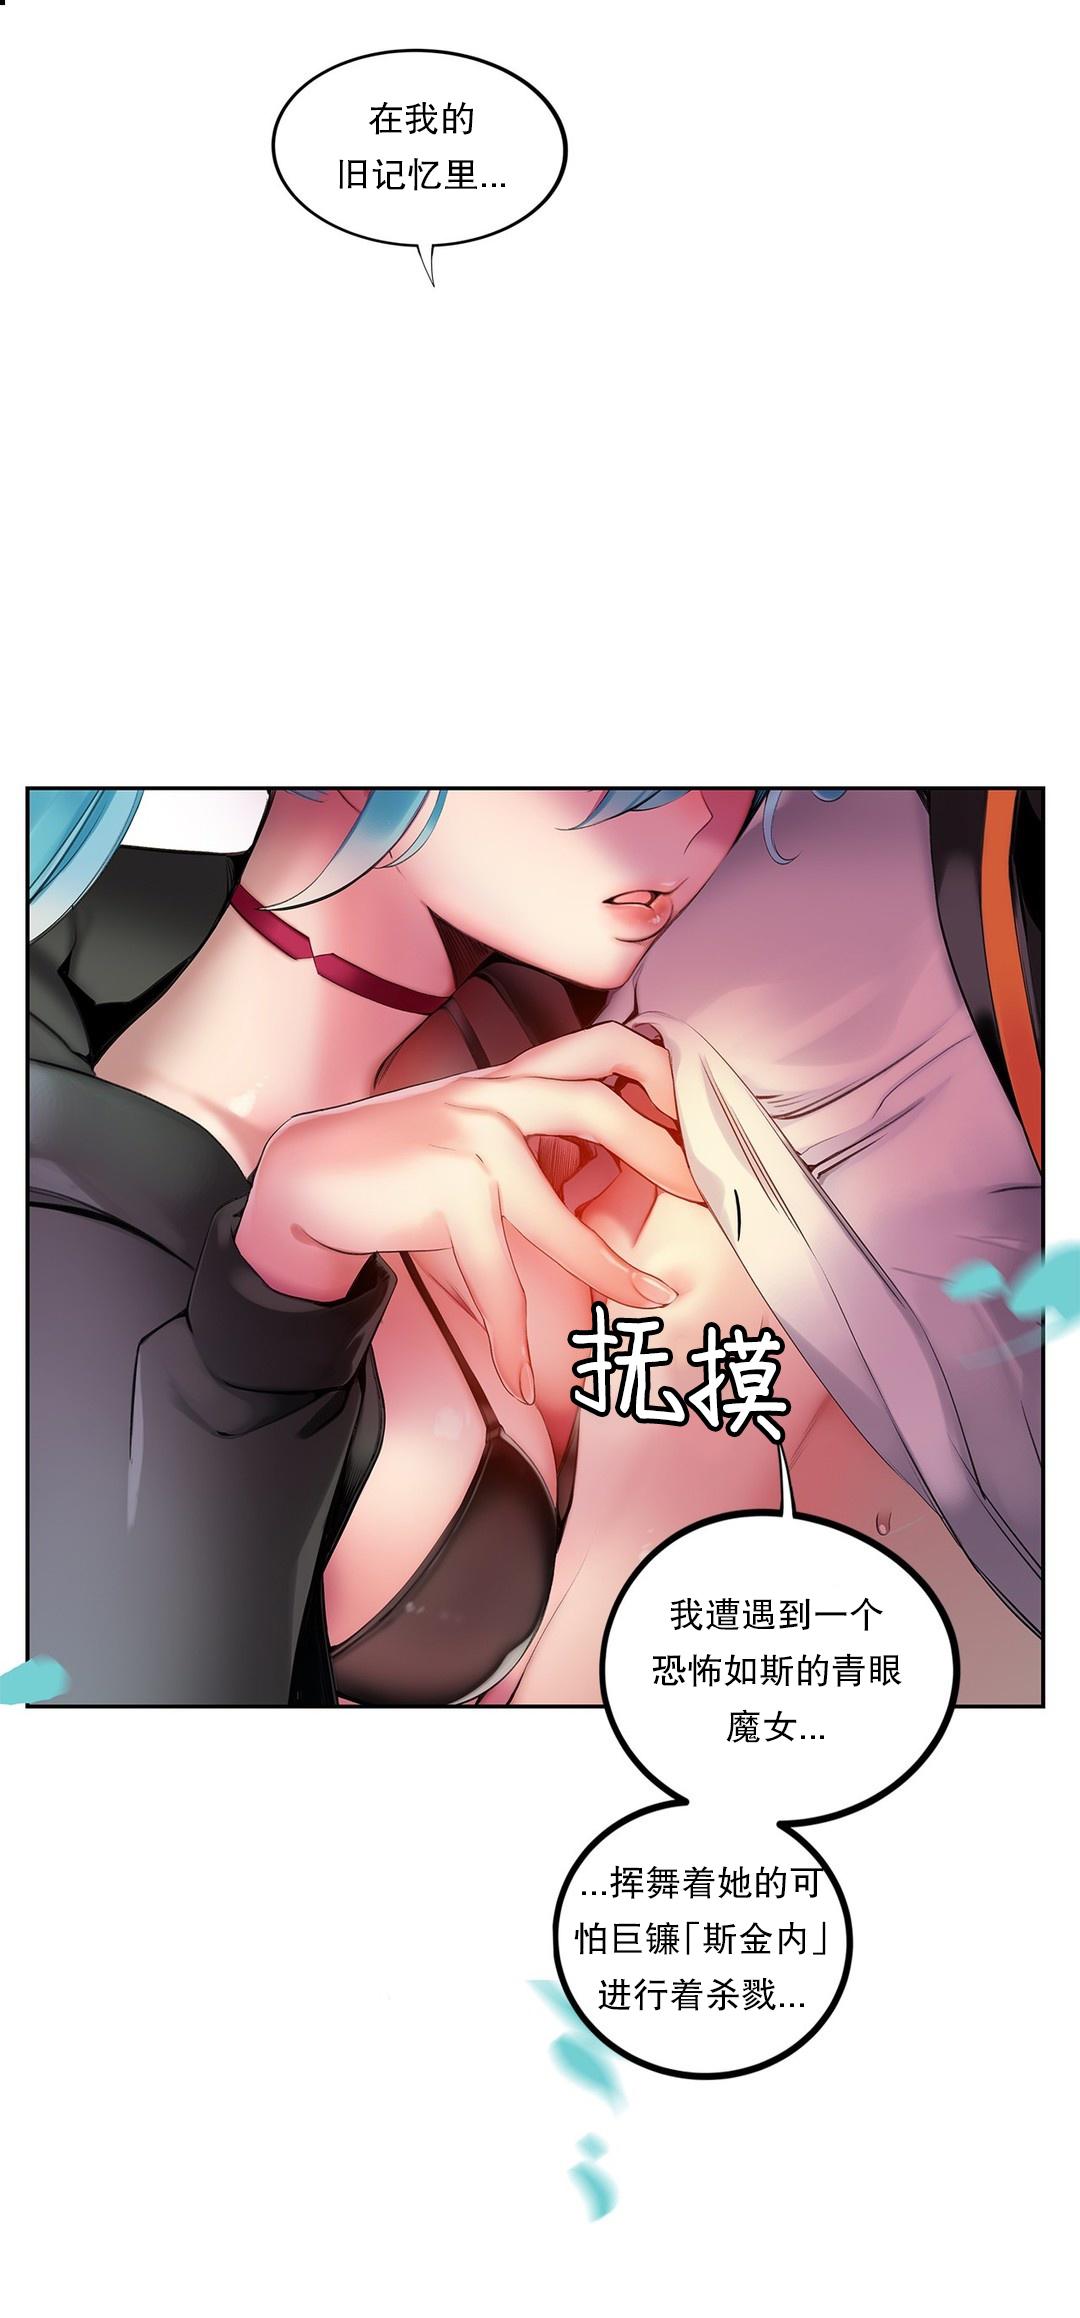 [Juder] Lilith`s Cord (第二季) Ch.61-64 [Chinese] [aaatwist个人汉化] [Ongoing] 128